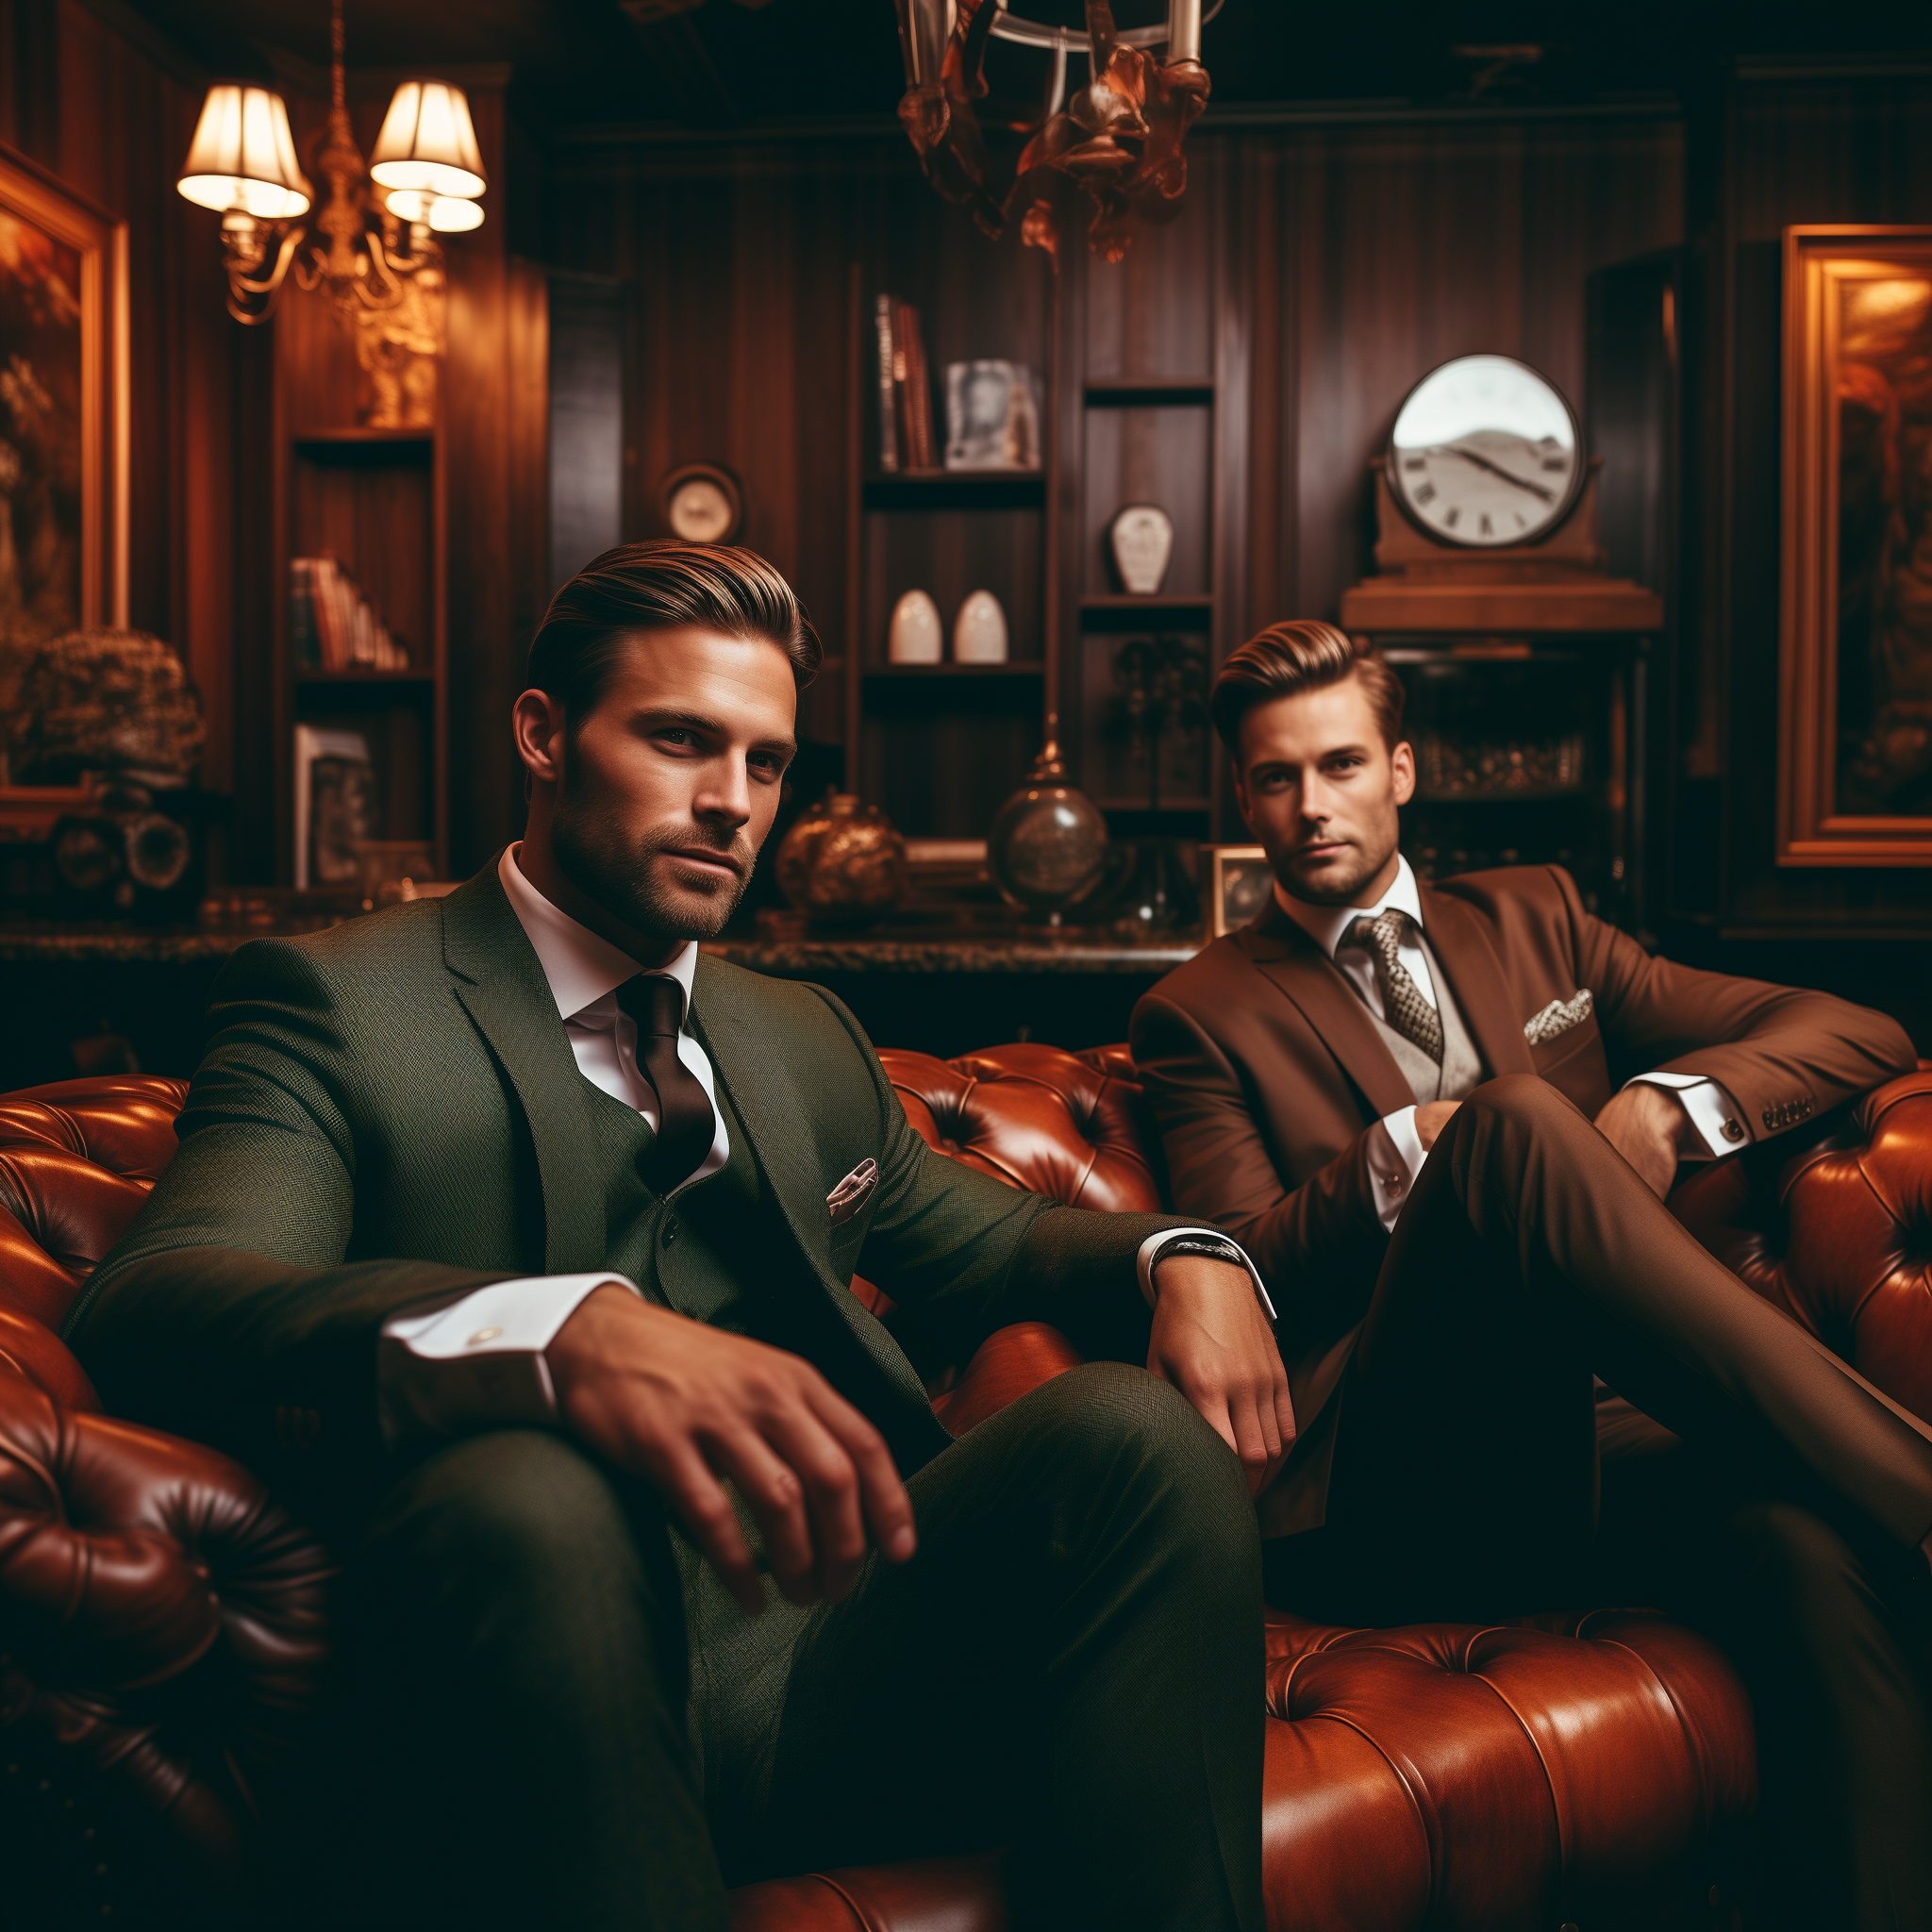 ctpromptmachine_gentlemen_with_quiff_hairstyle_in_suite_sitting_05806189-2c1f-43a9-bfdf-72f7a549927d